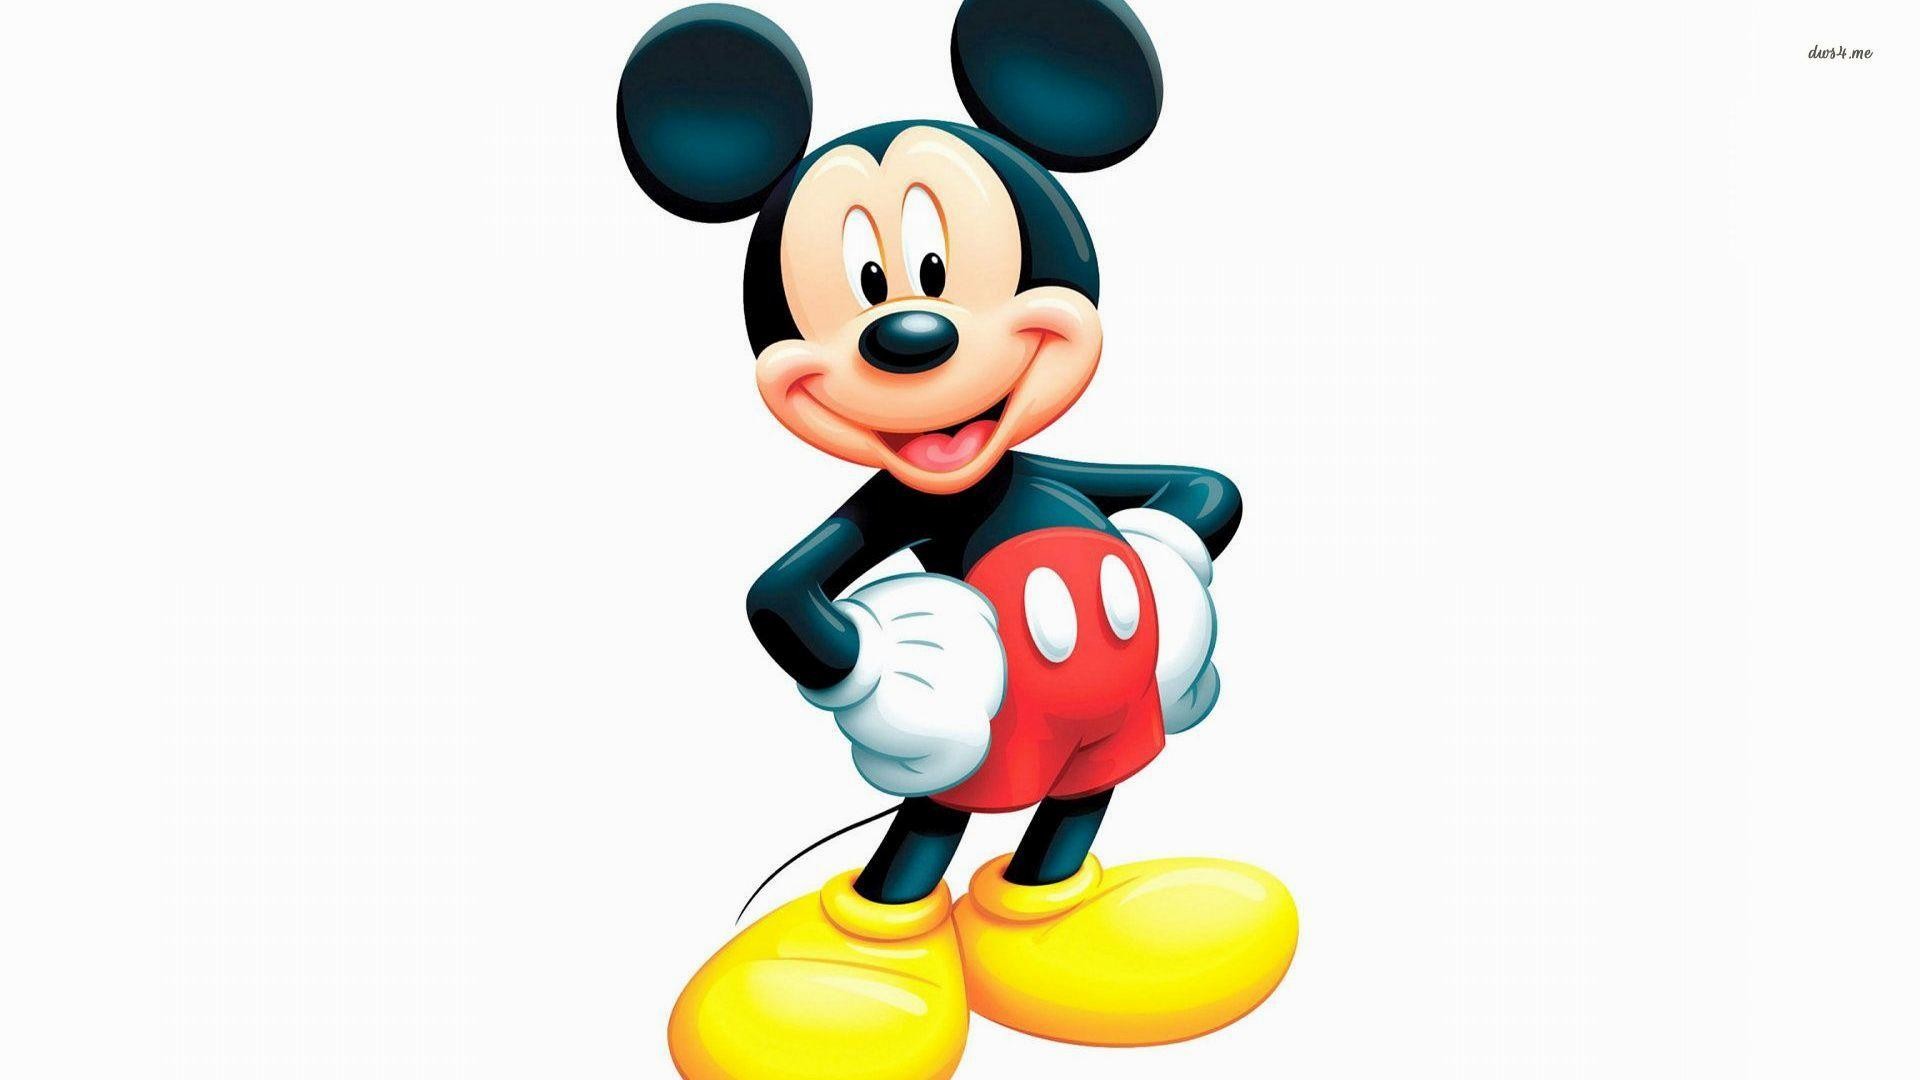 2 Mickey Mouse Hd Wallpapers Backgrounds Wallpaper Abyss 1920x1080